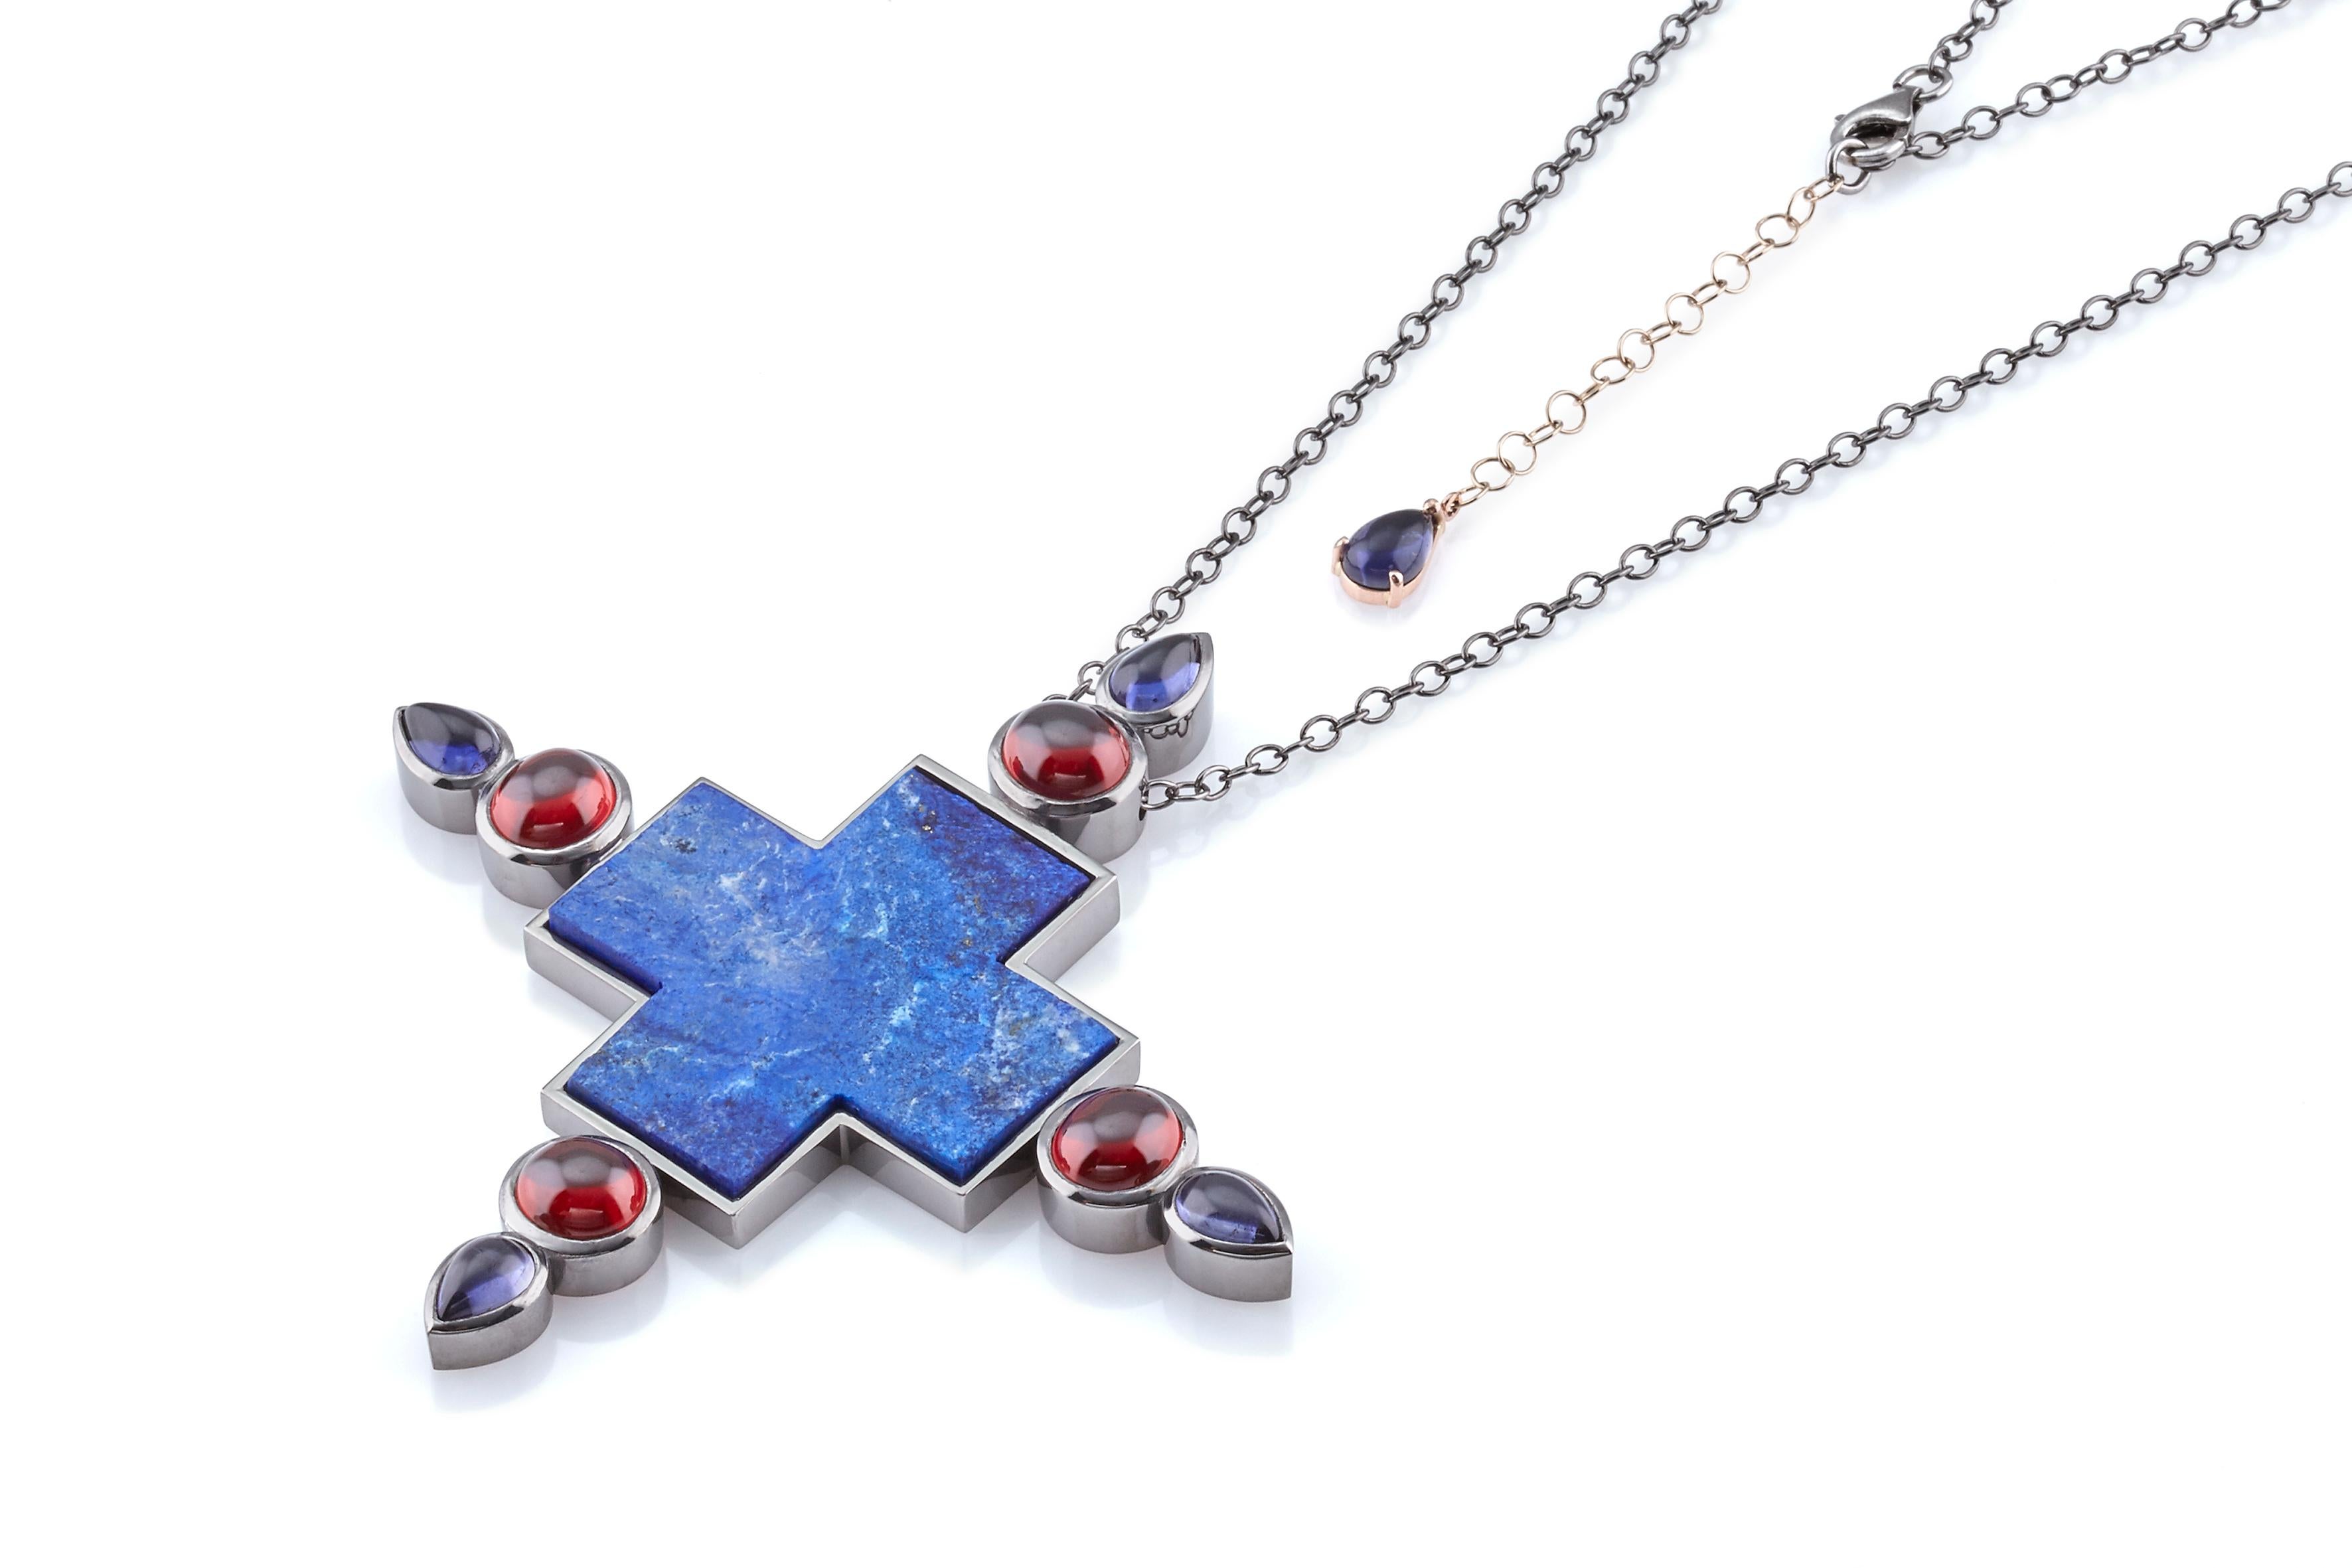 One Of A Kind Cross Necklace, in oxidised Sterling Silver and 18 kt Gold decorative with a rare Lapis Lazuli rough blue cross, Iolite and Garnet cabochon.
This big Handcrafted, dramatic, avant-garde and original cross with a distinct Eastern twist,